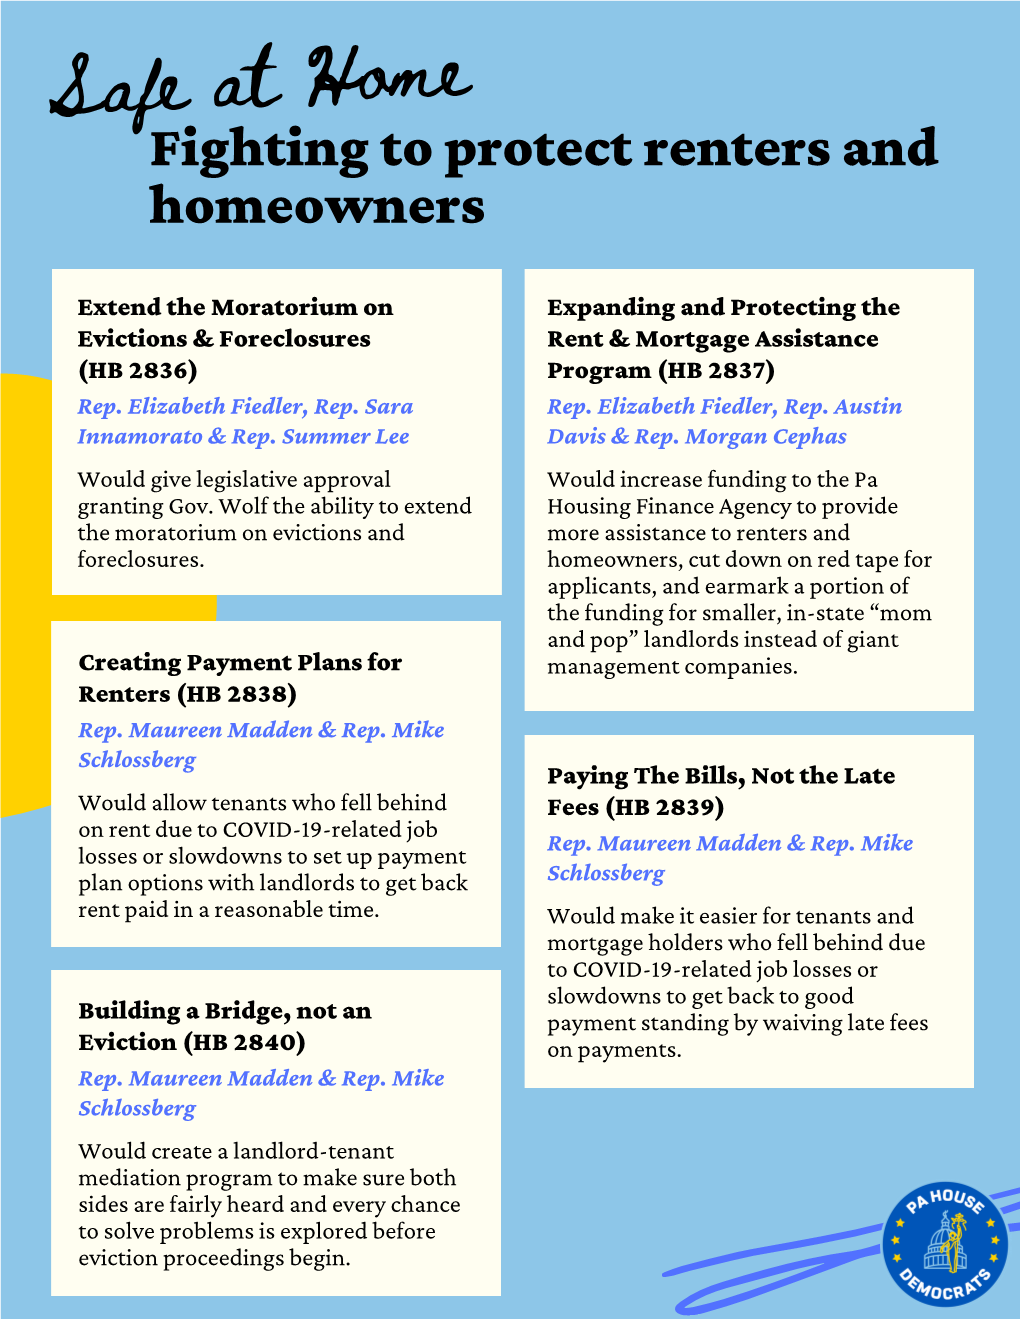 Safe at Home Fighting to Protect Renters and Homeowners